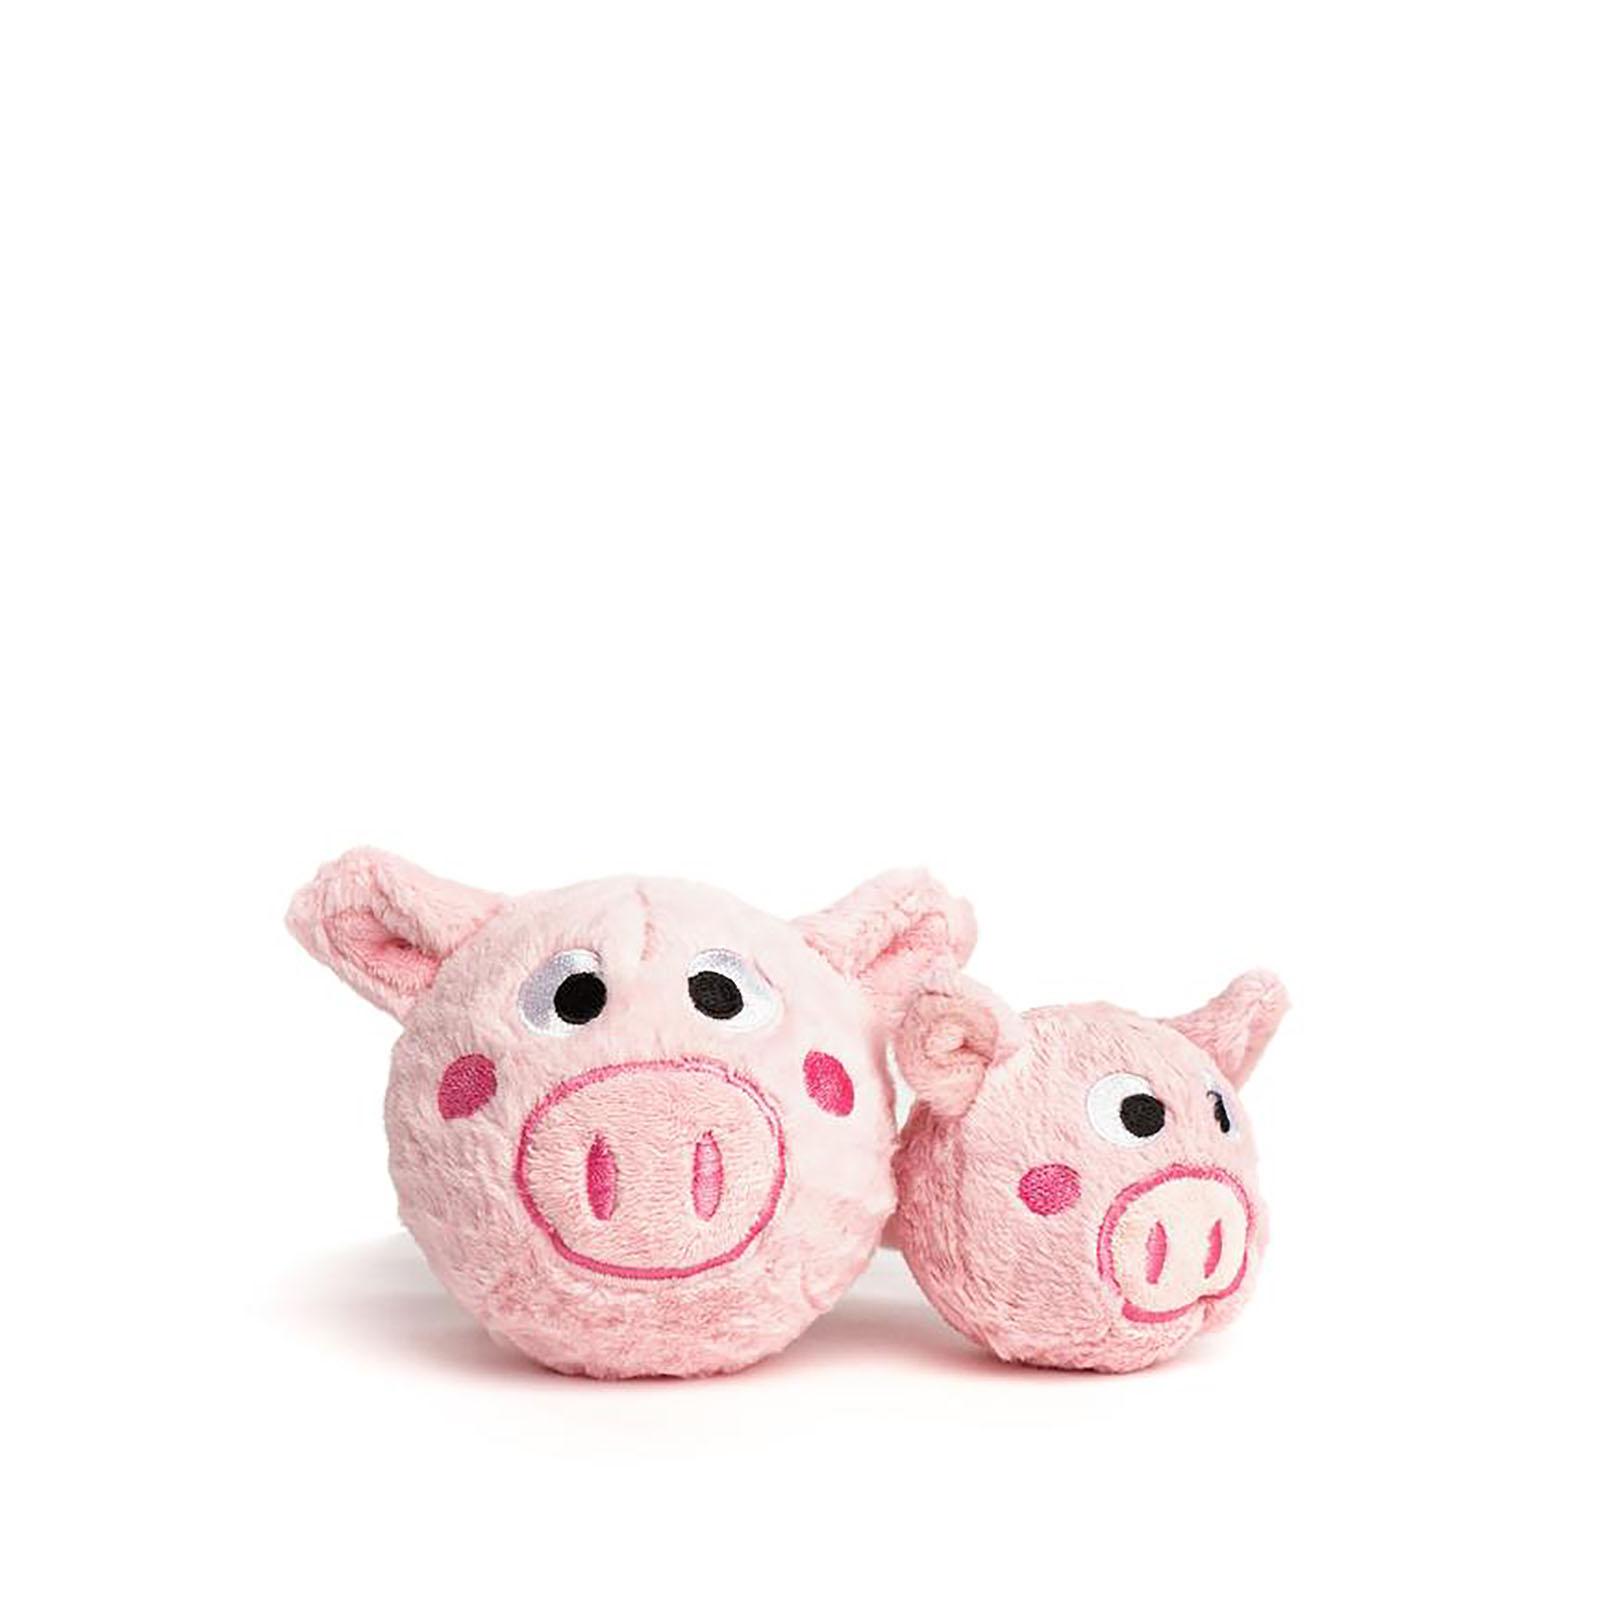 fabdog® Country Critter faball® Dog Toy - Pig